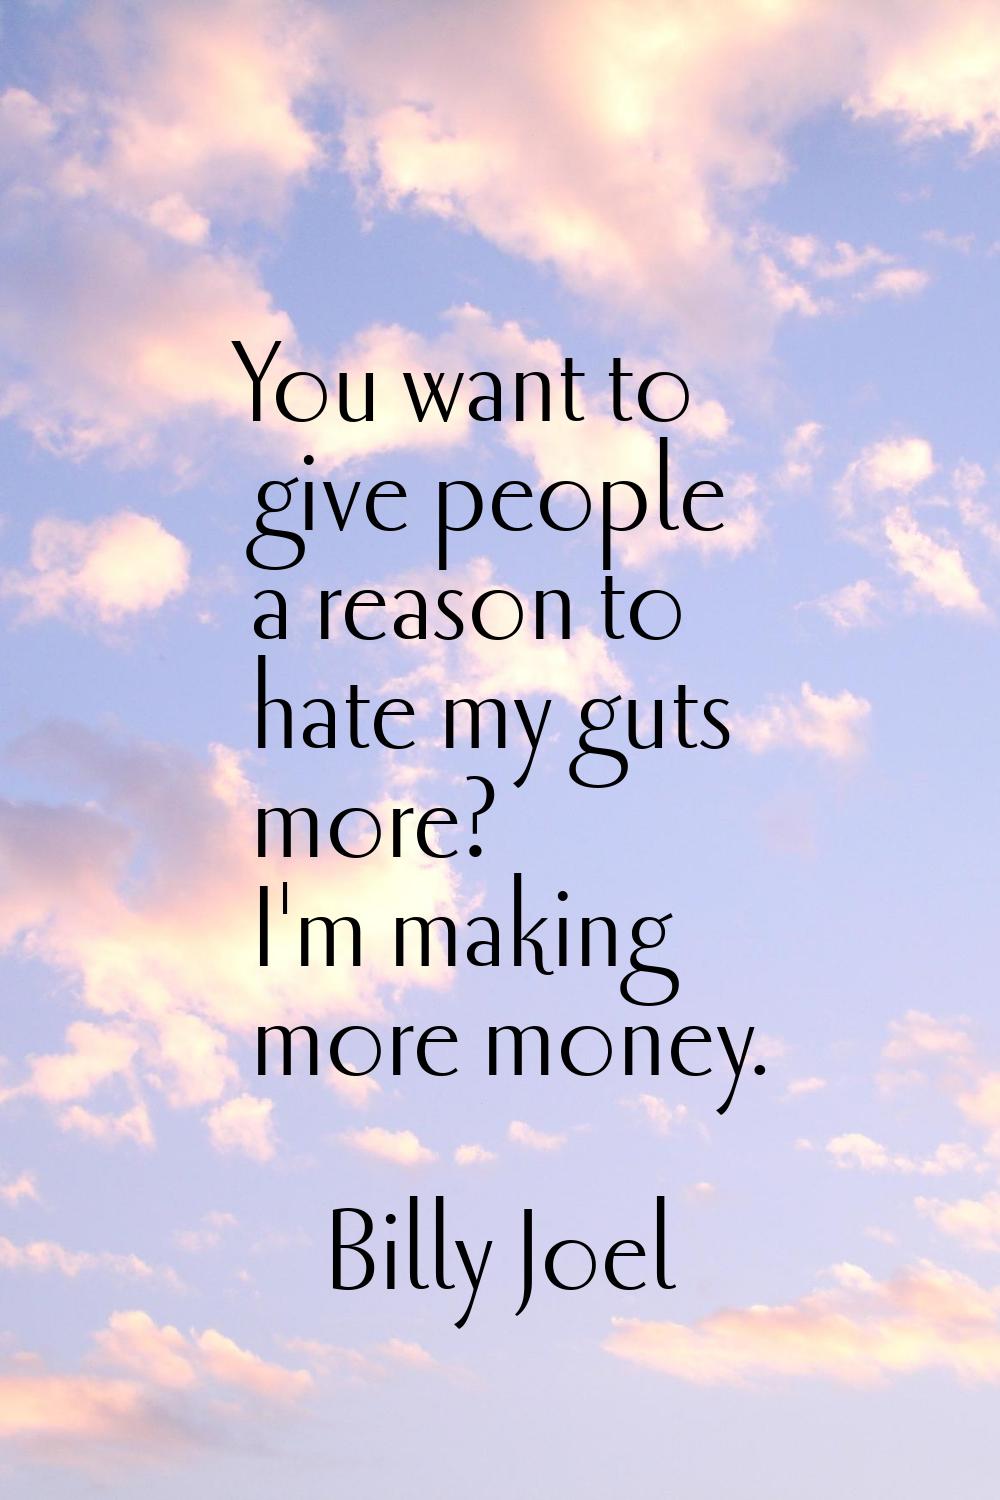 You want to give people a reason to hate my guts more? I'm making more money.